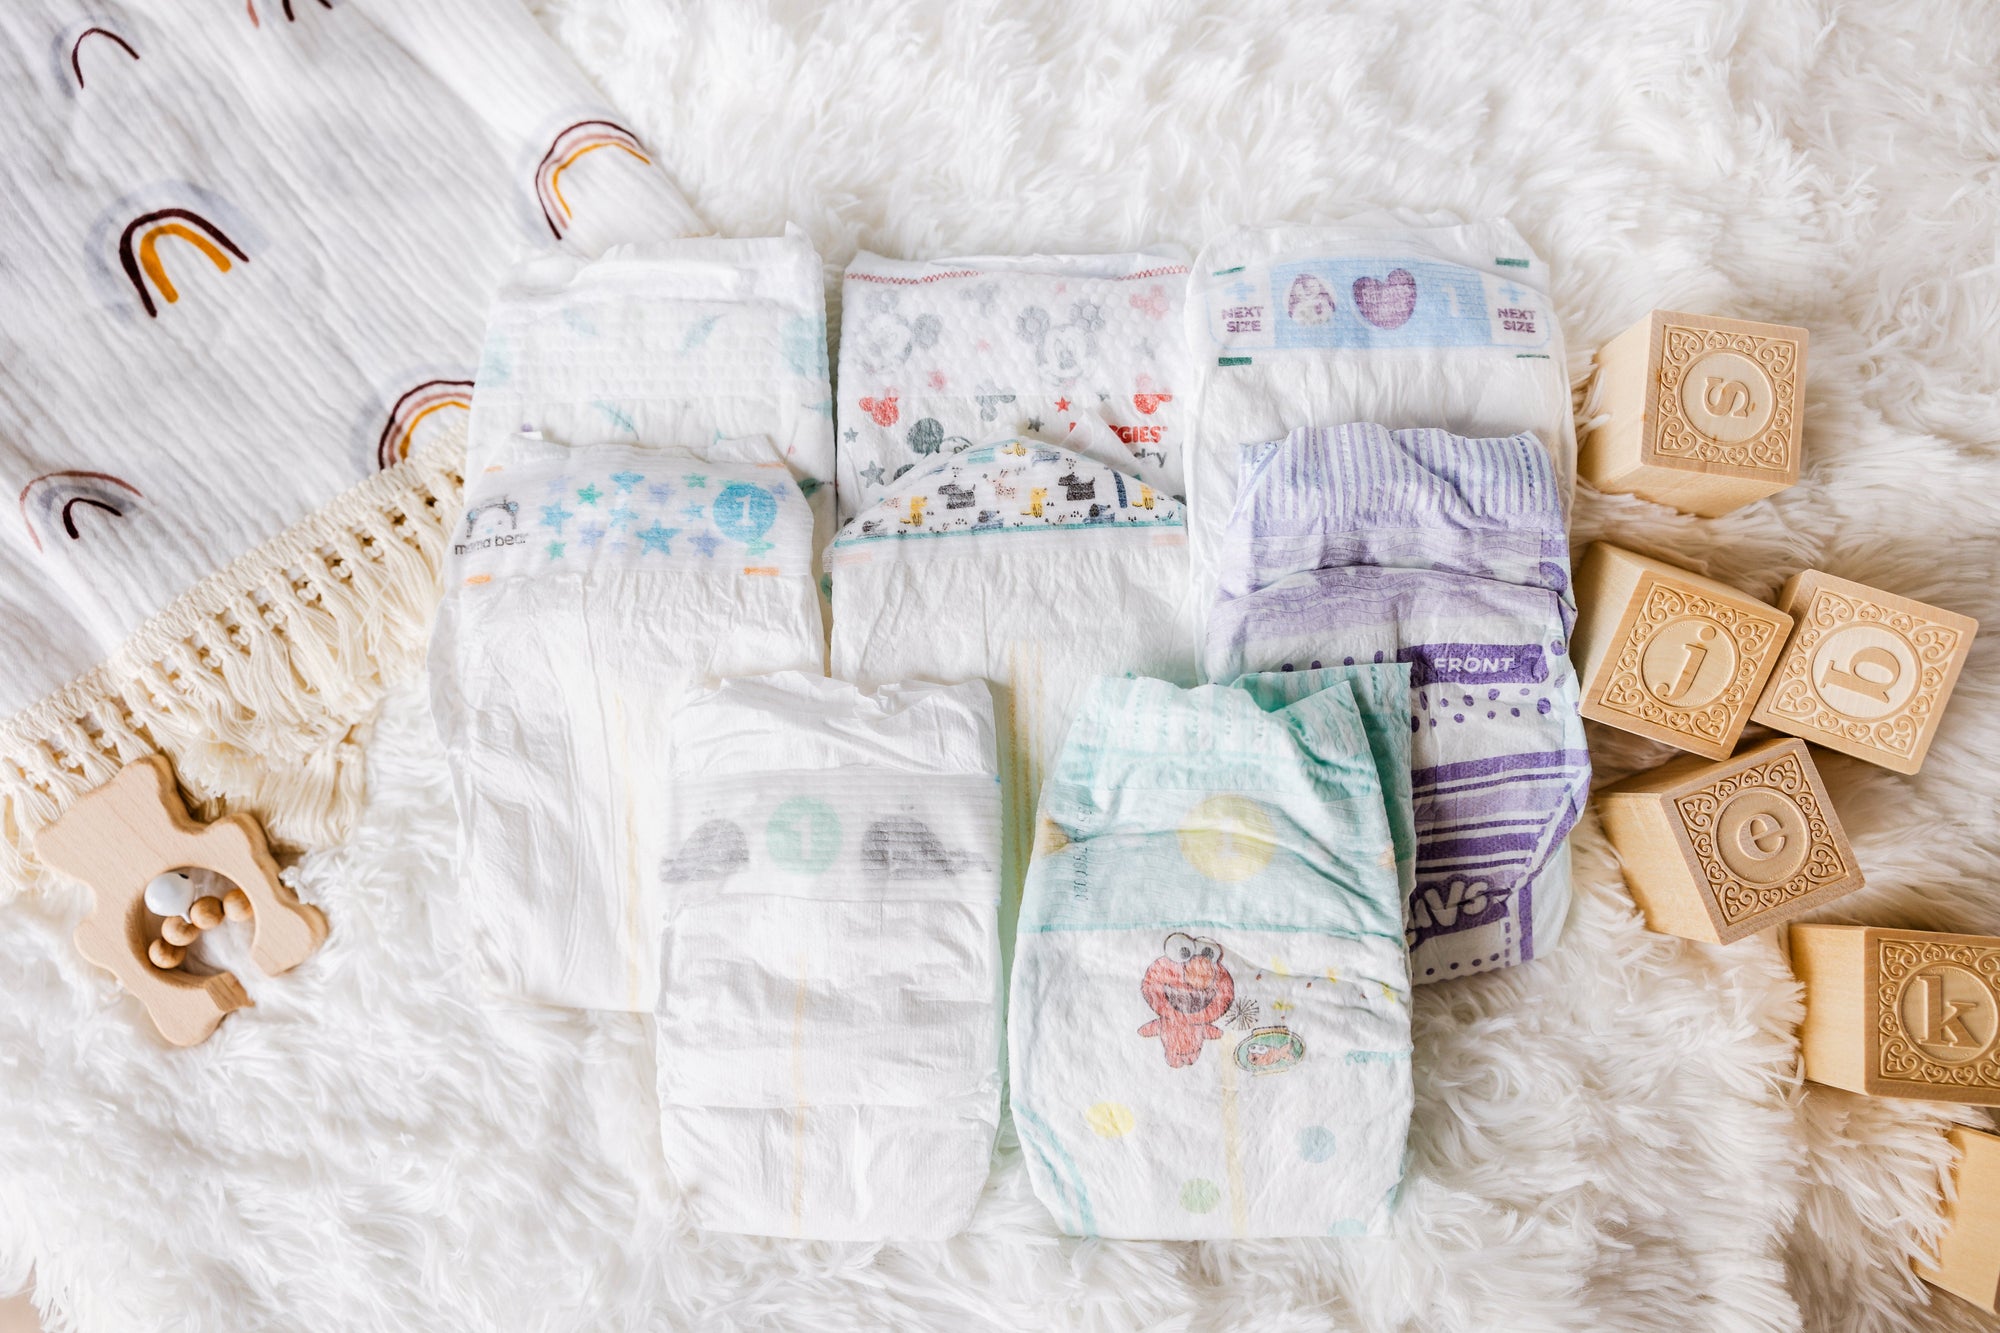 Modest Mama Diaper Sampler Package: 9 Diaper Sample Packs of cost-effective diapers including Kirkland Signature, Mama Bear, Member's Mark, Up & Up, Parent's Choice, Huggies Snug & Dry, Pampers Baby Dry and Luvs